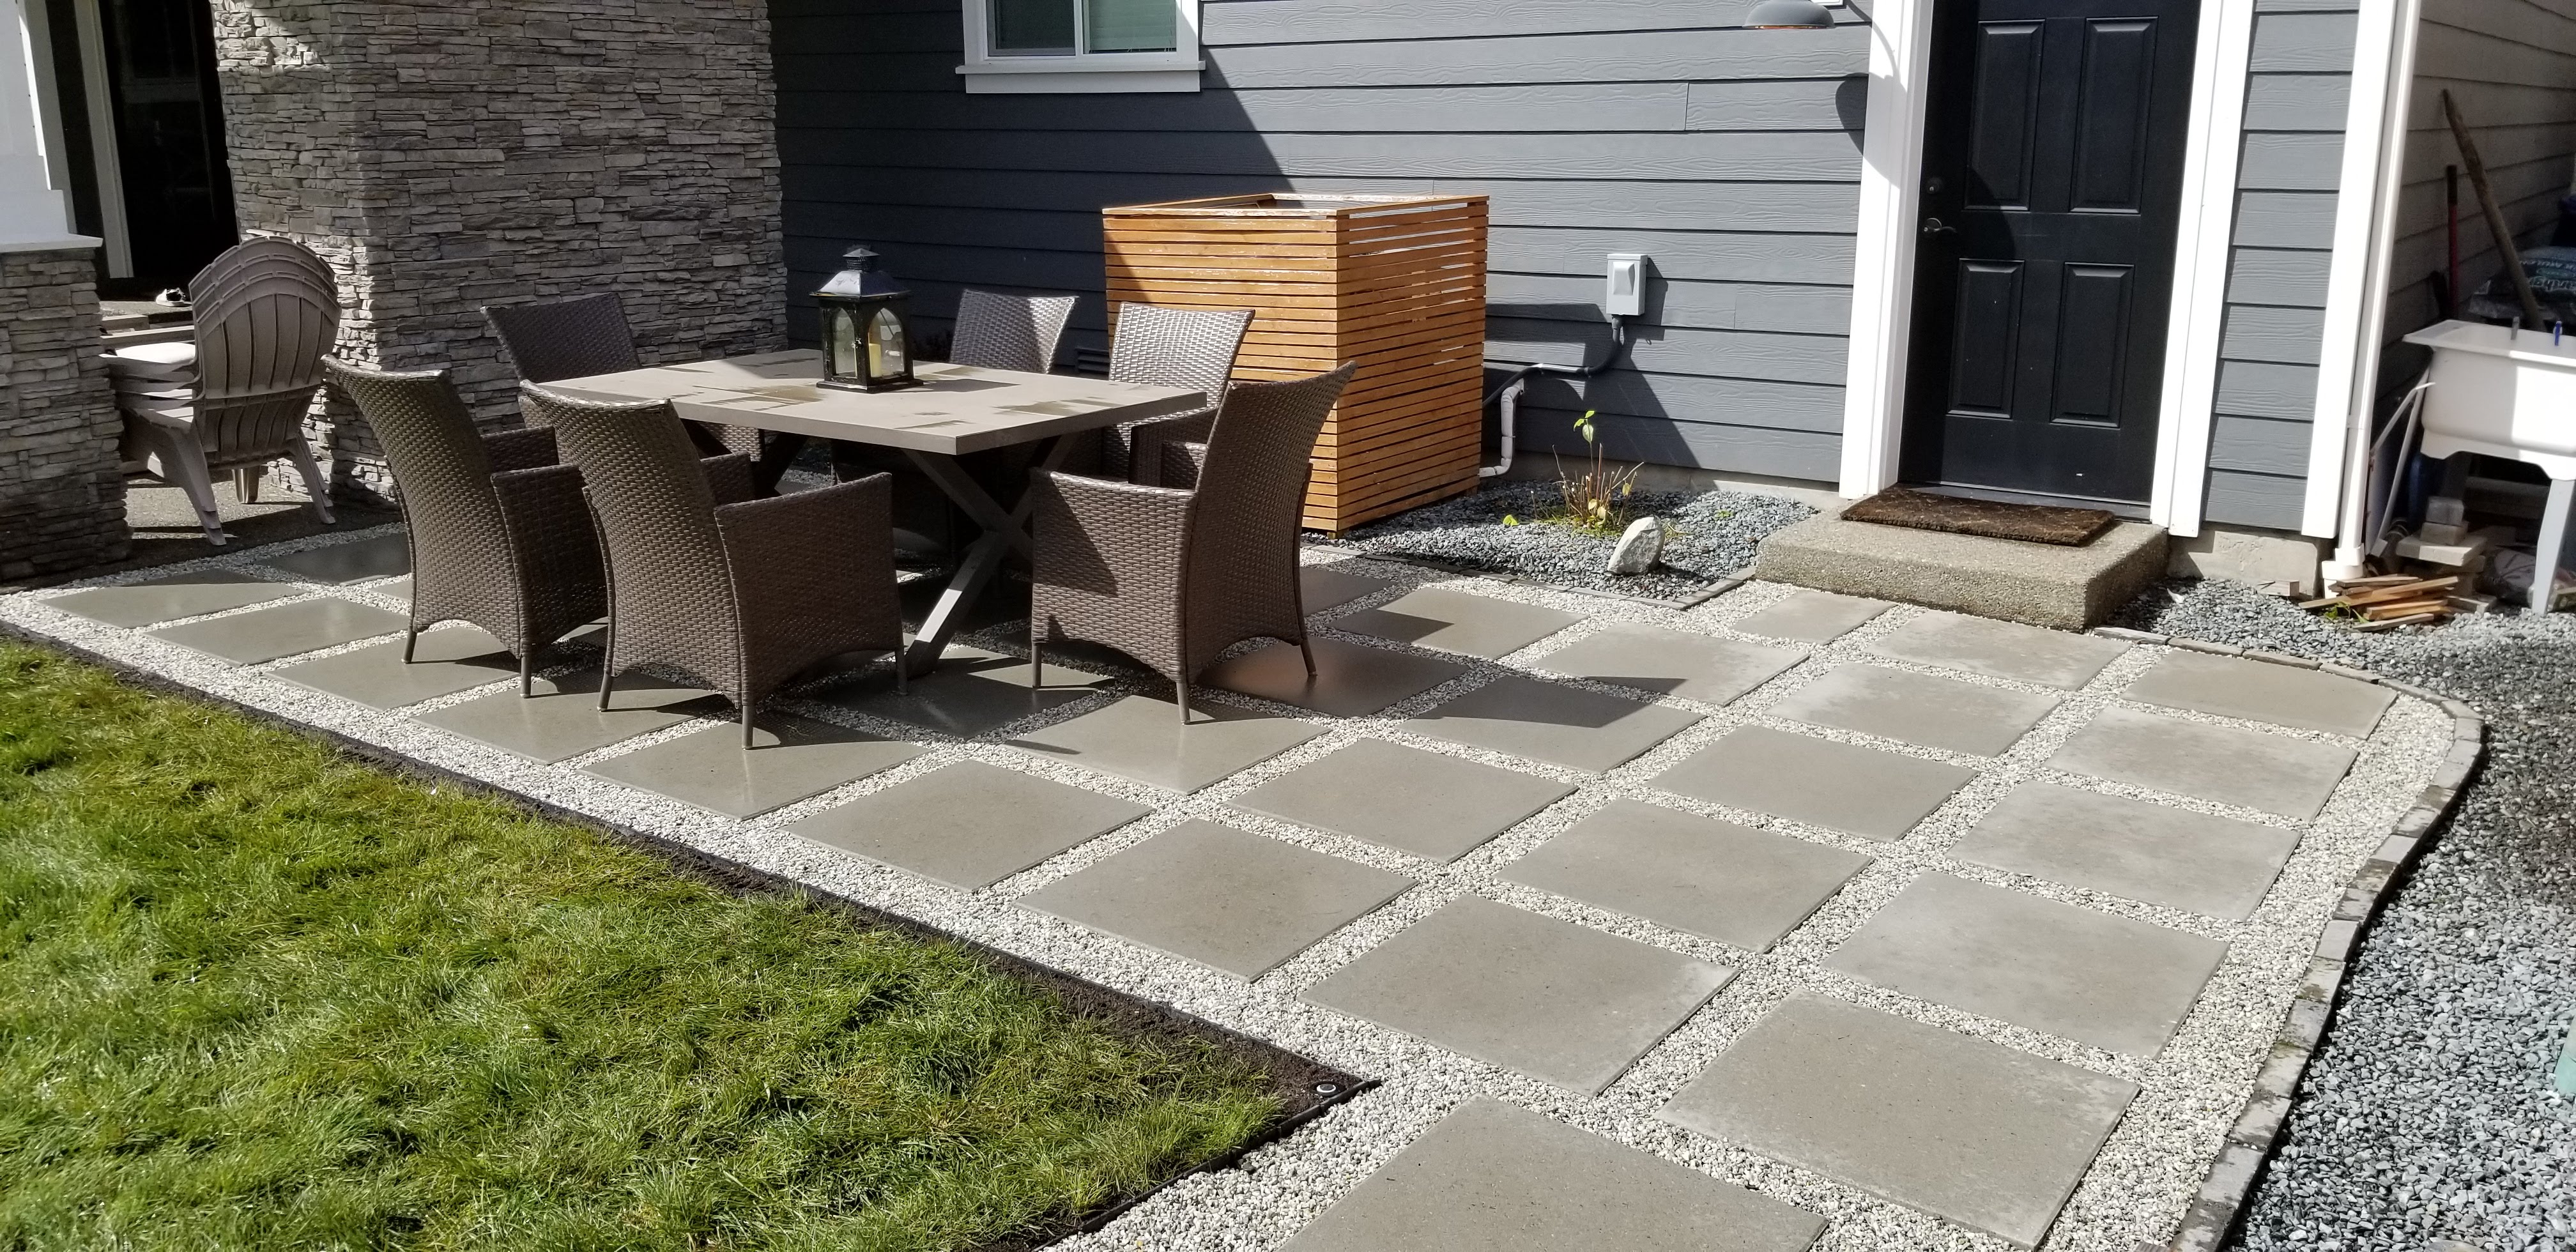 PATIO WITH VANCOUVER BAY SLABS GRAY